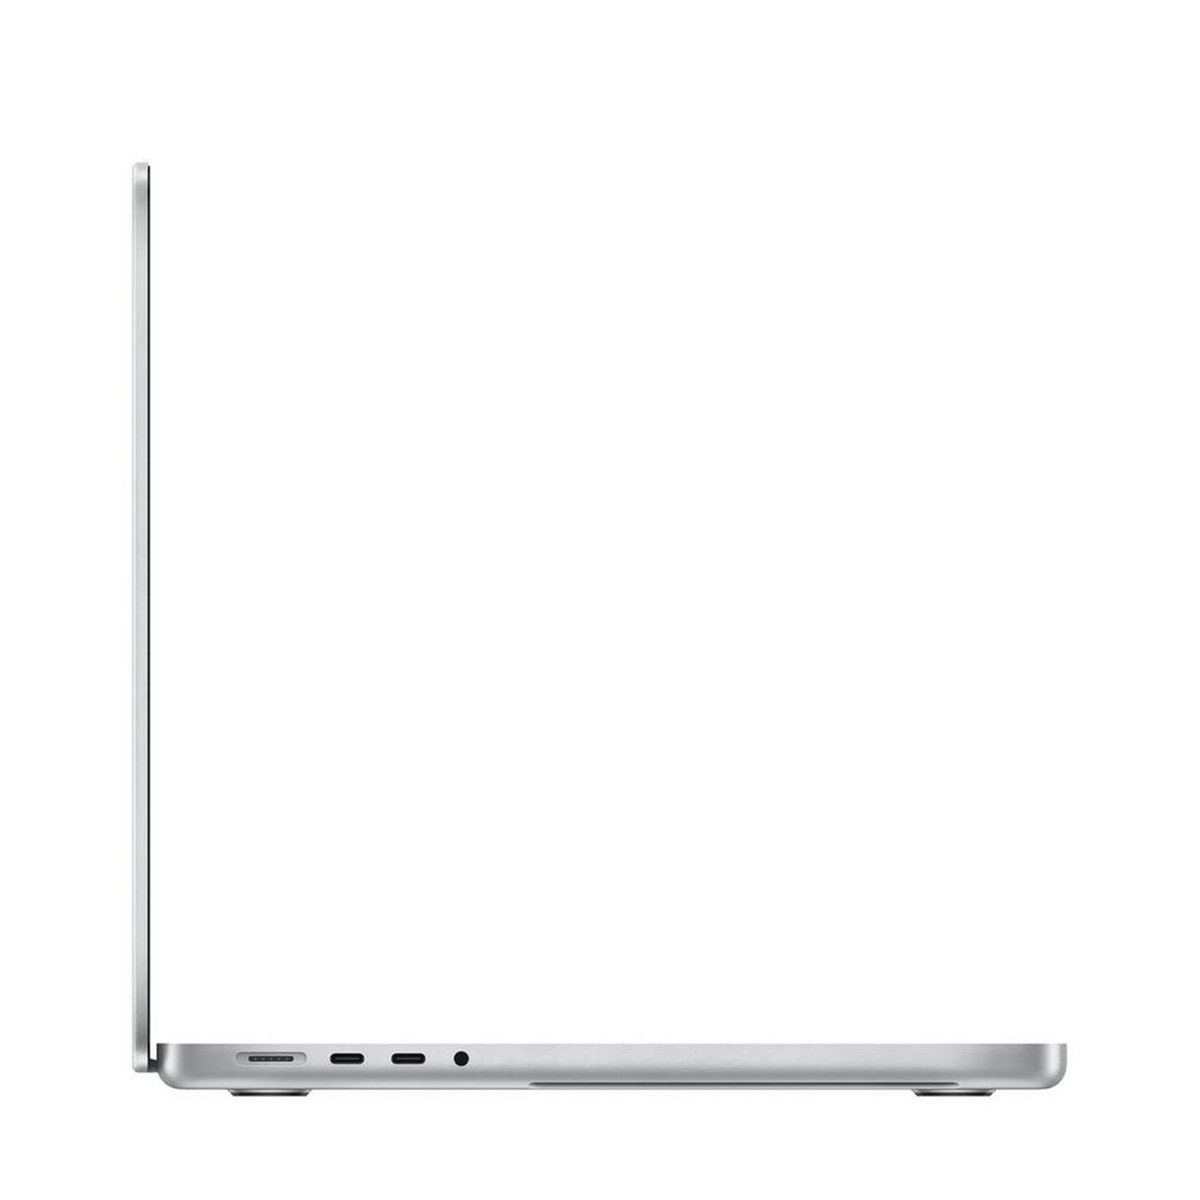 Apple 14-inch MacBook Pro: Apple M1 Pro chip with 8‑core CPU and 14‑core GPU, 512GB SSD - Silver English Keyboard